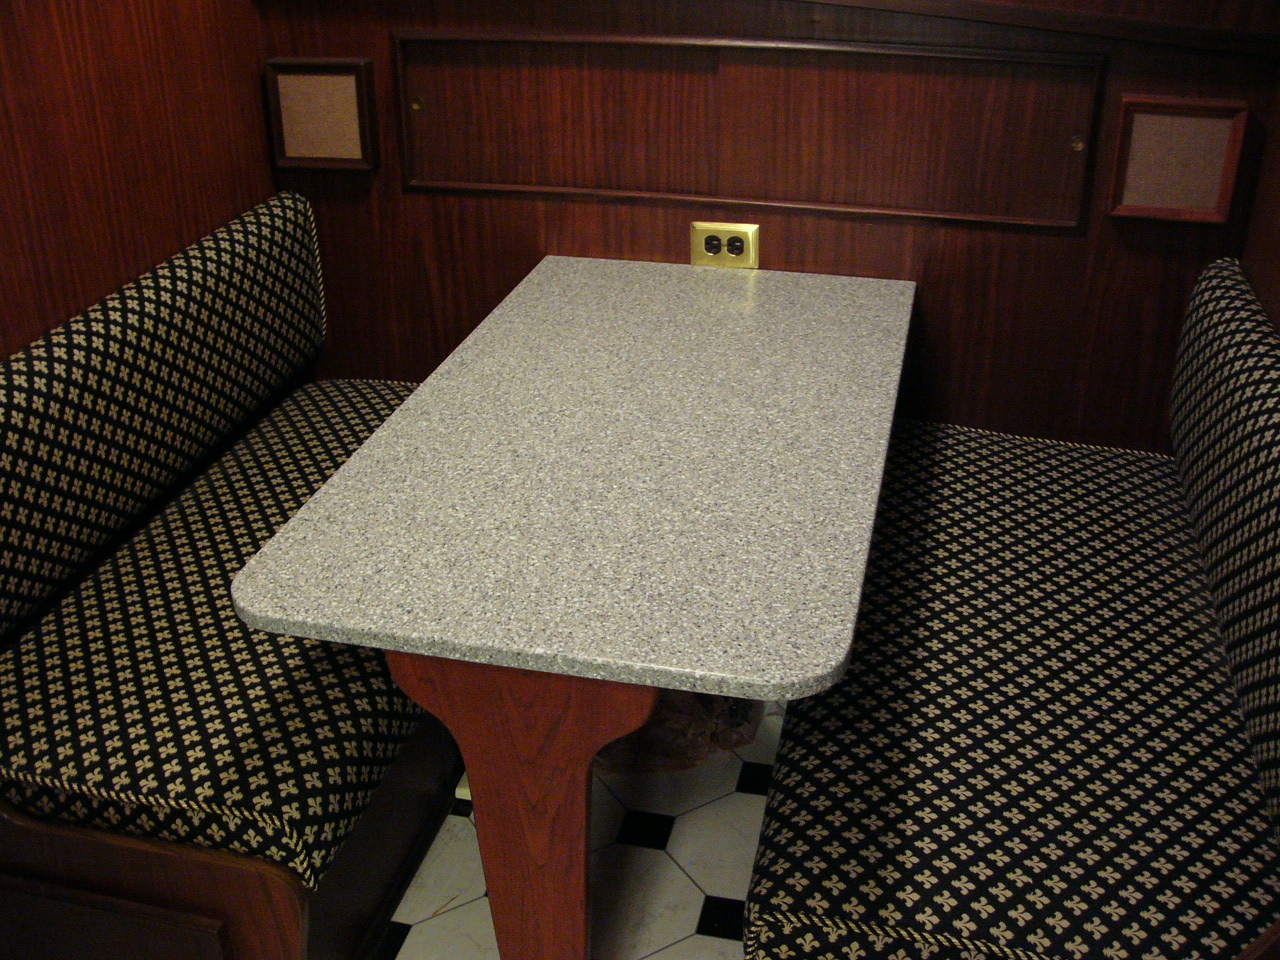 New Galley Table